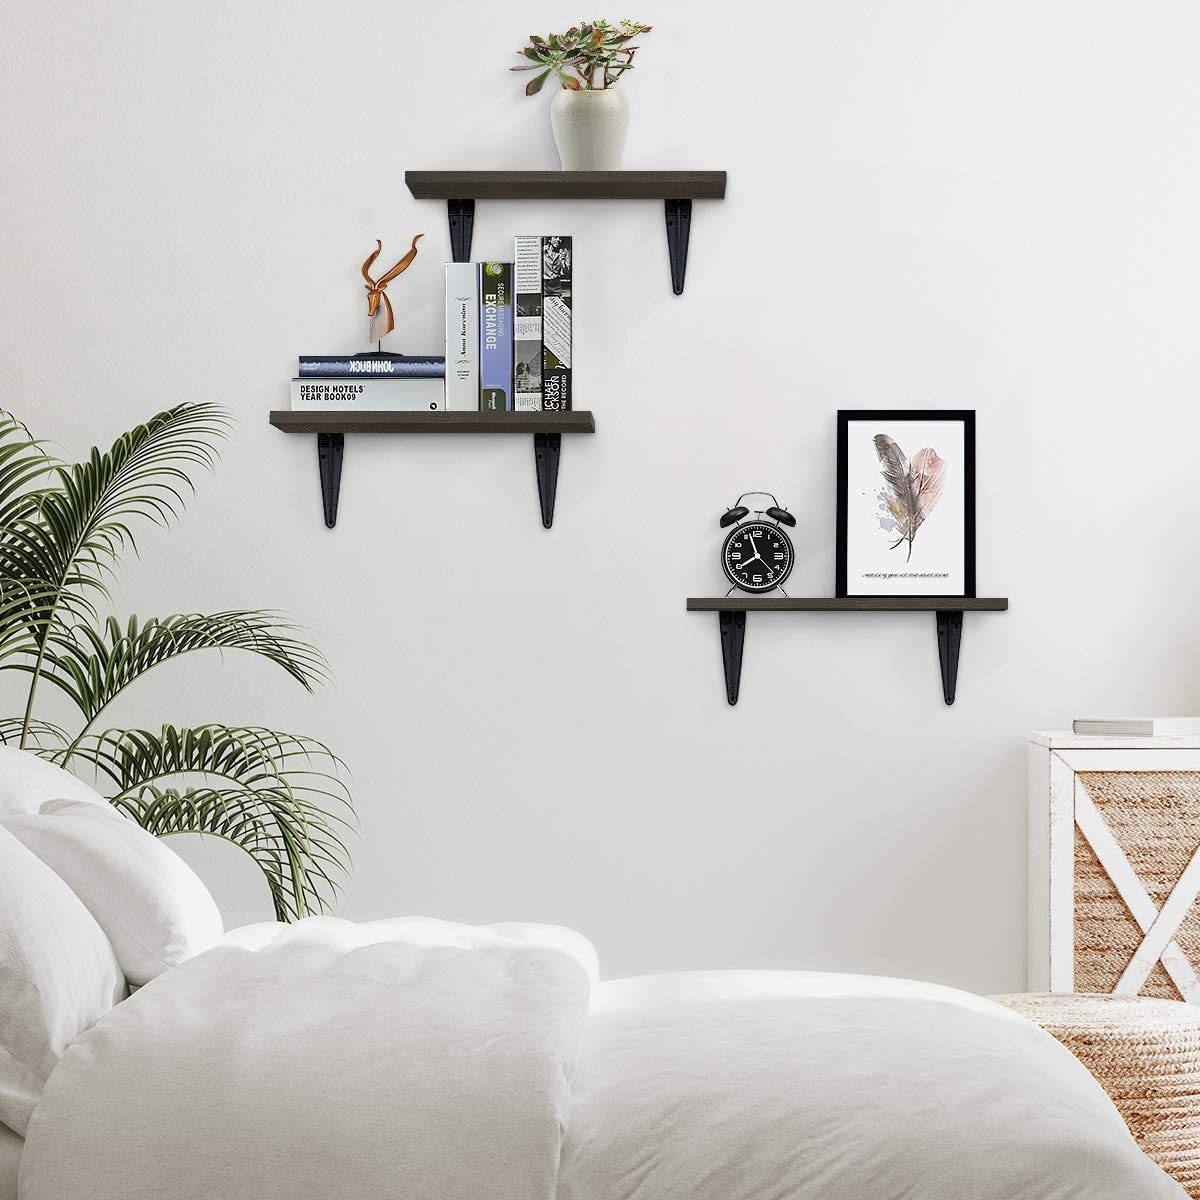 Three floating shelves with various items on them, like books, a clock, and artwork